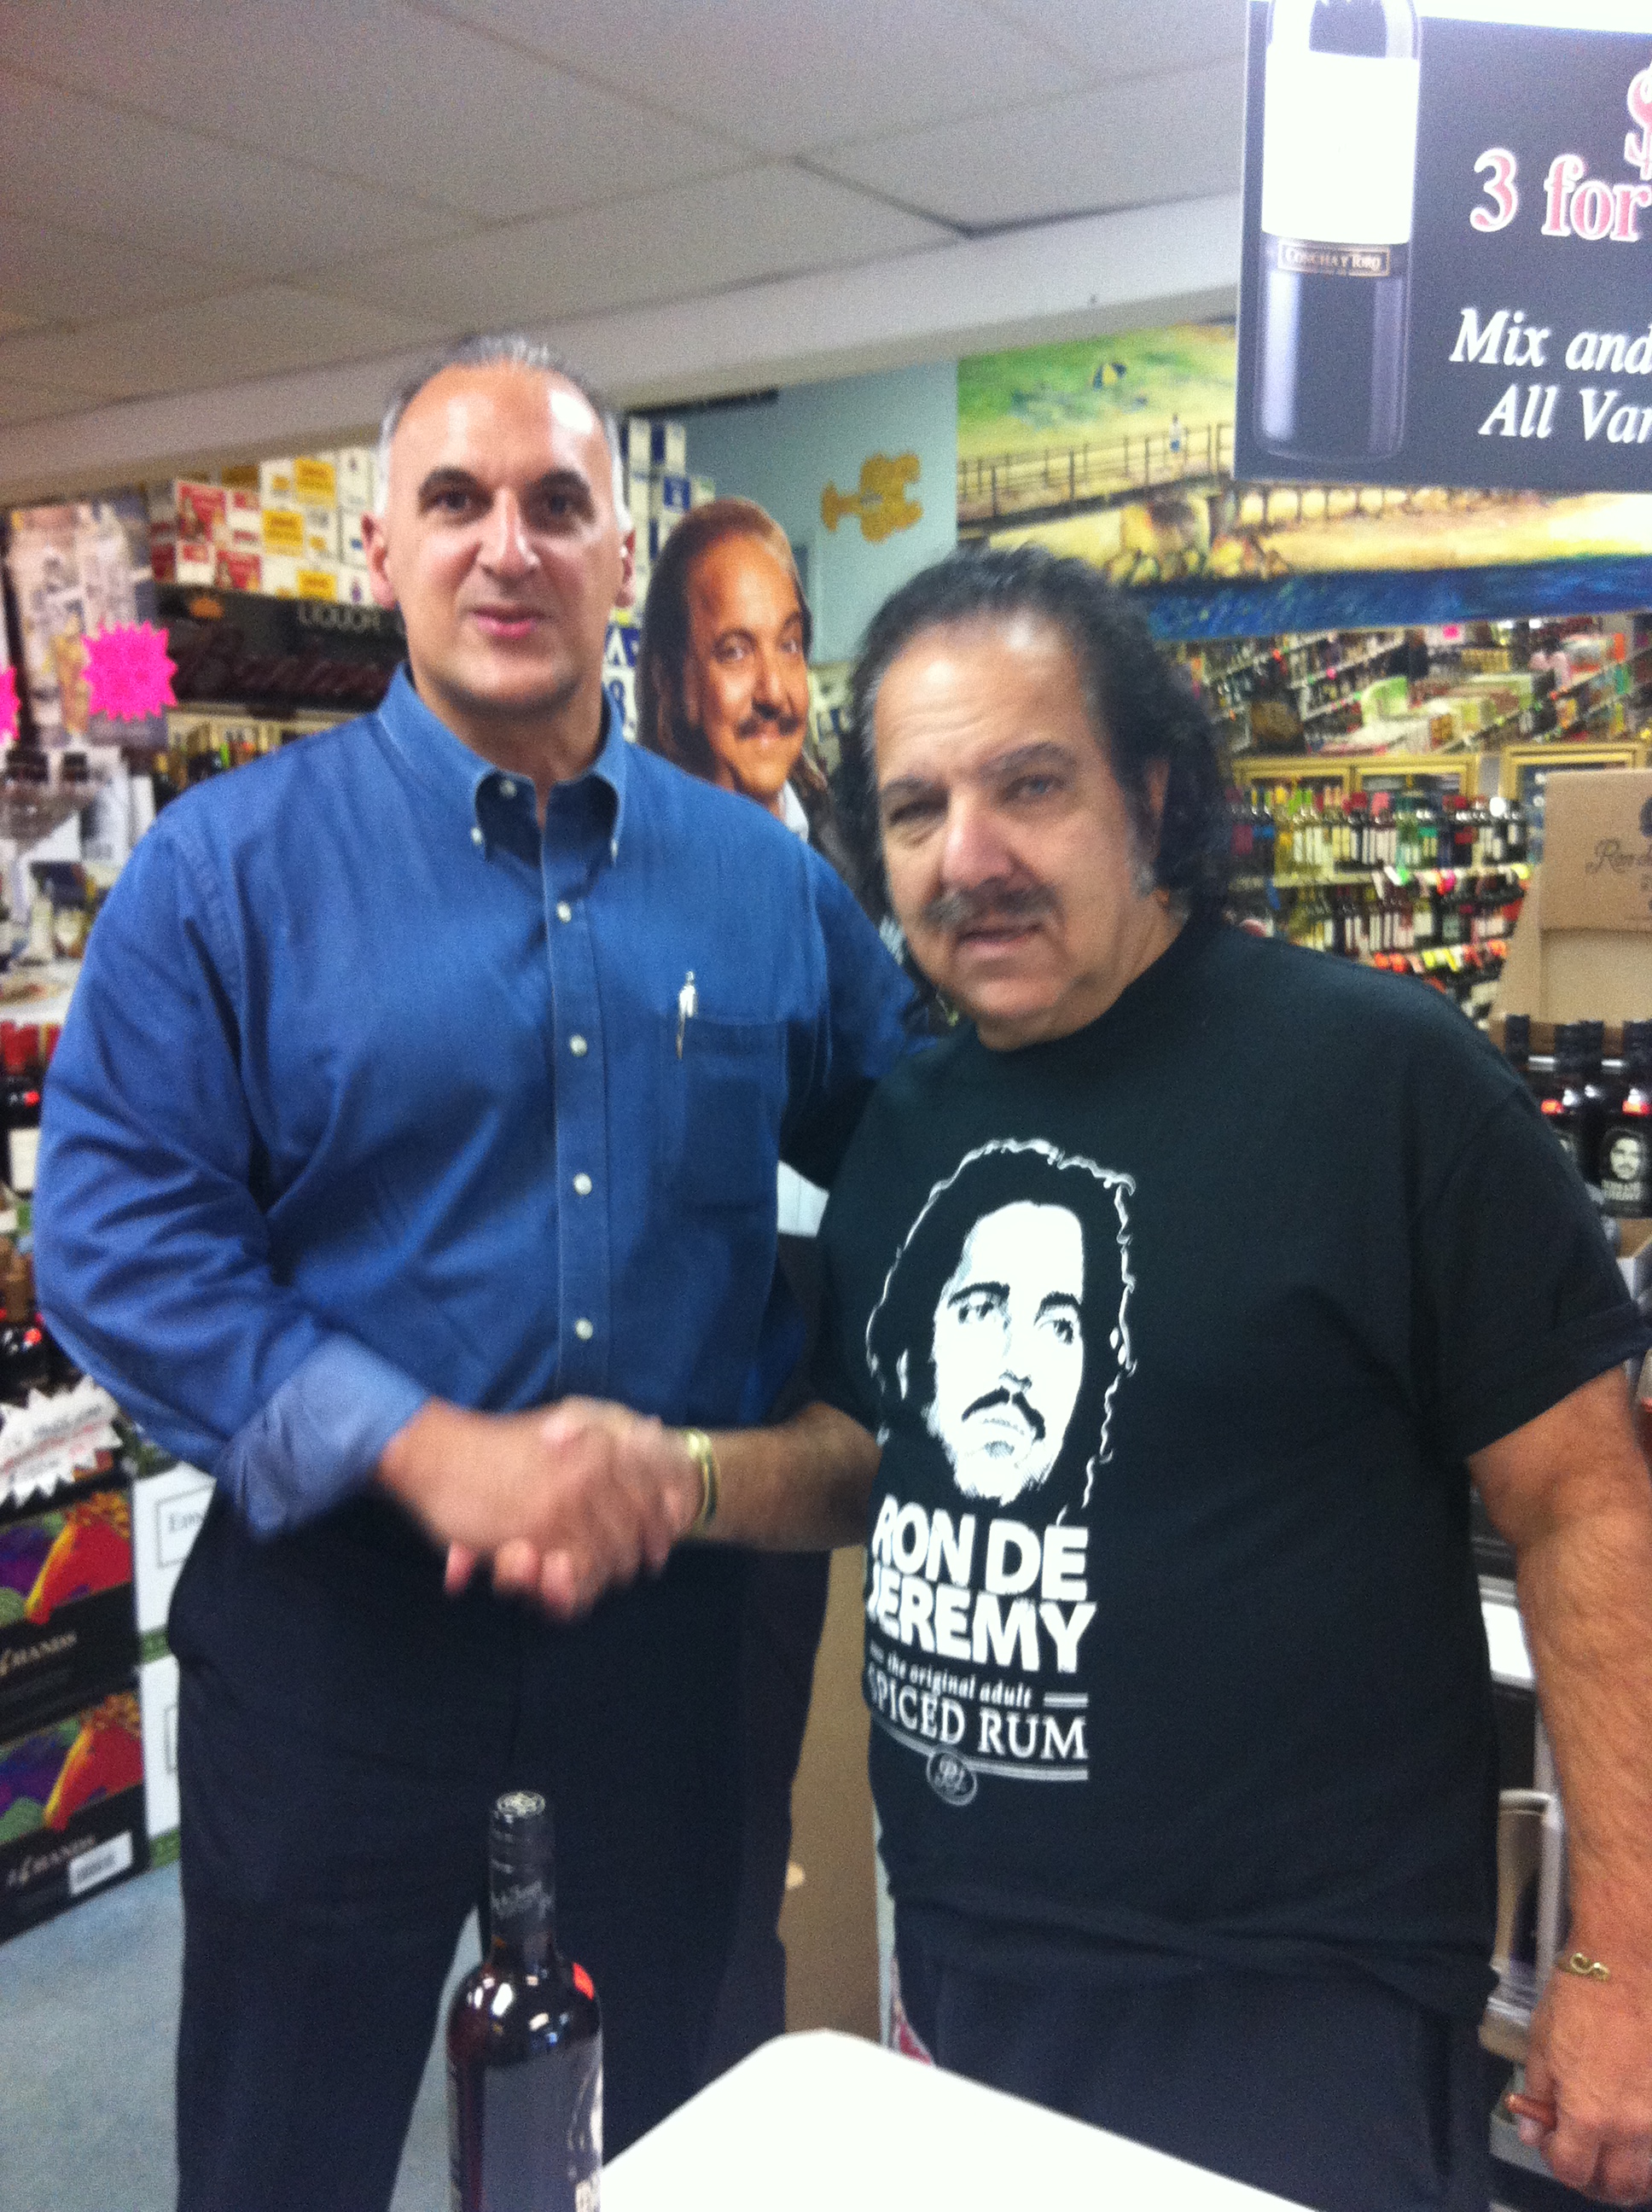 aileen barrozo recommends ron jeremy lisa ann pic